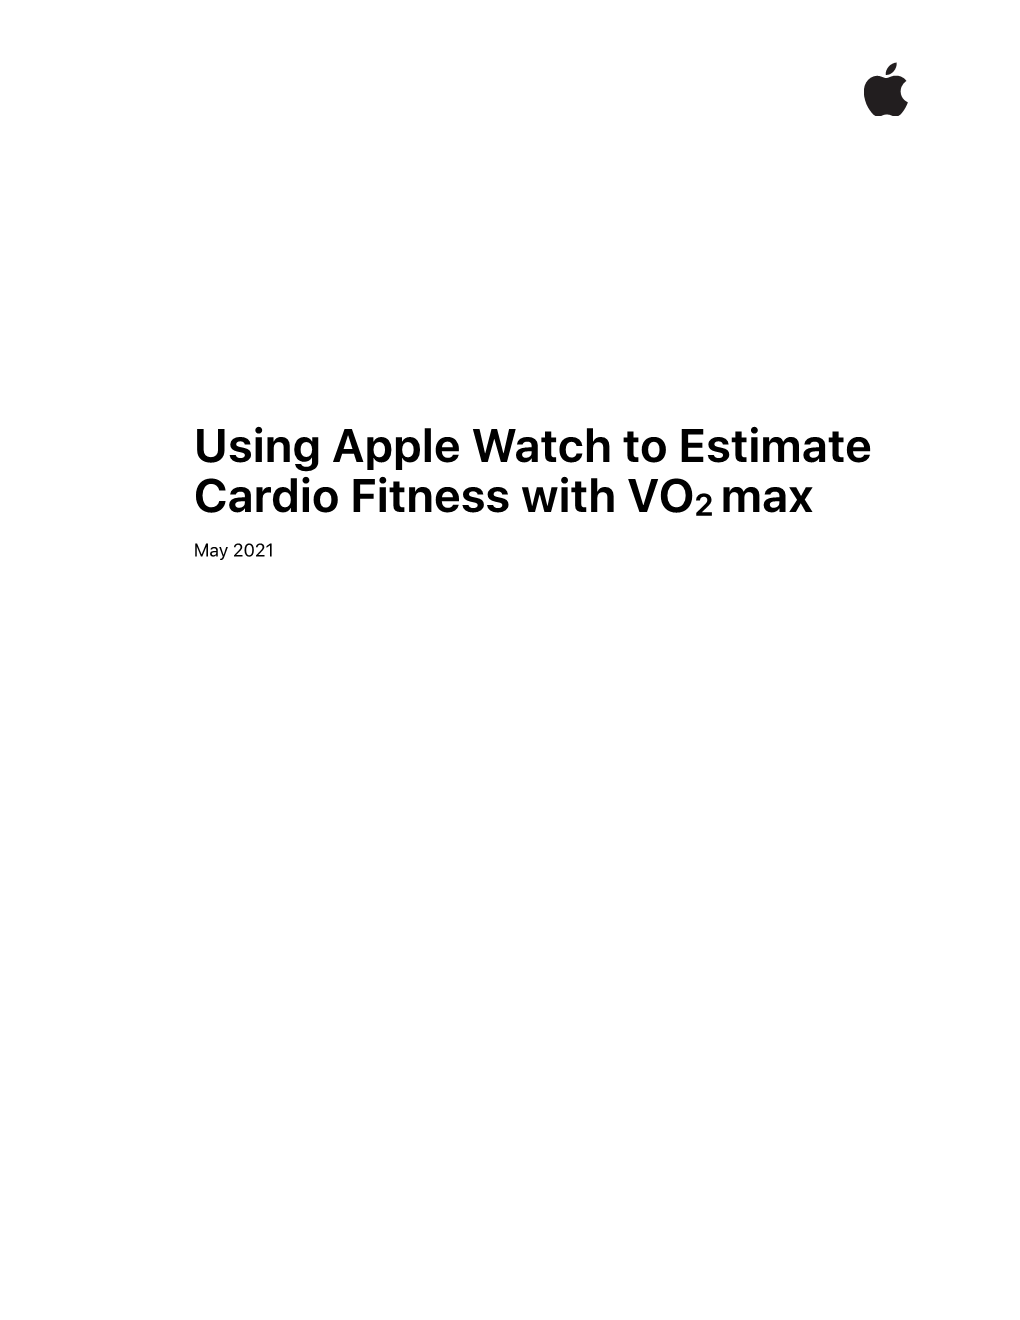 Using Apple Watch to Estimate Cardio Fitness with VO2 Max Clean